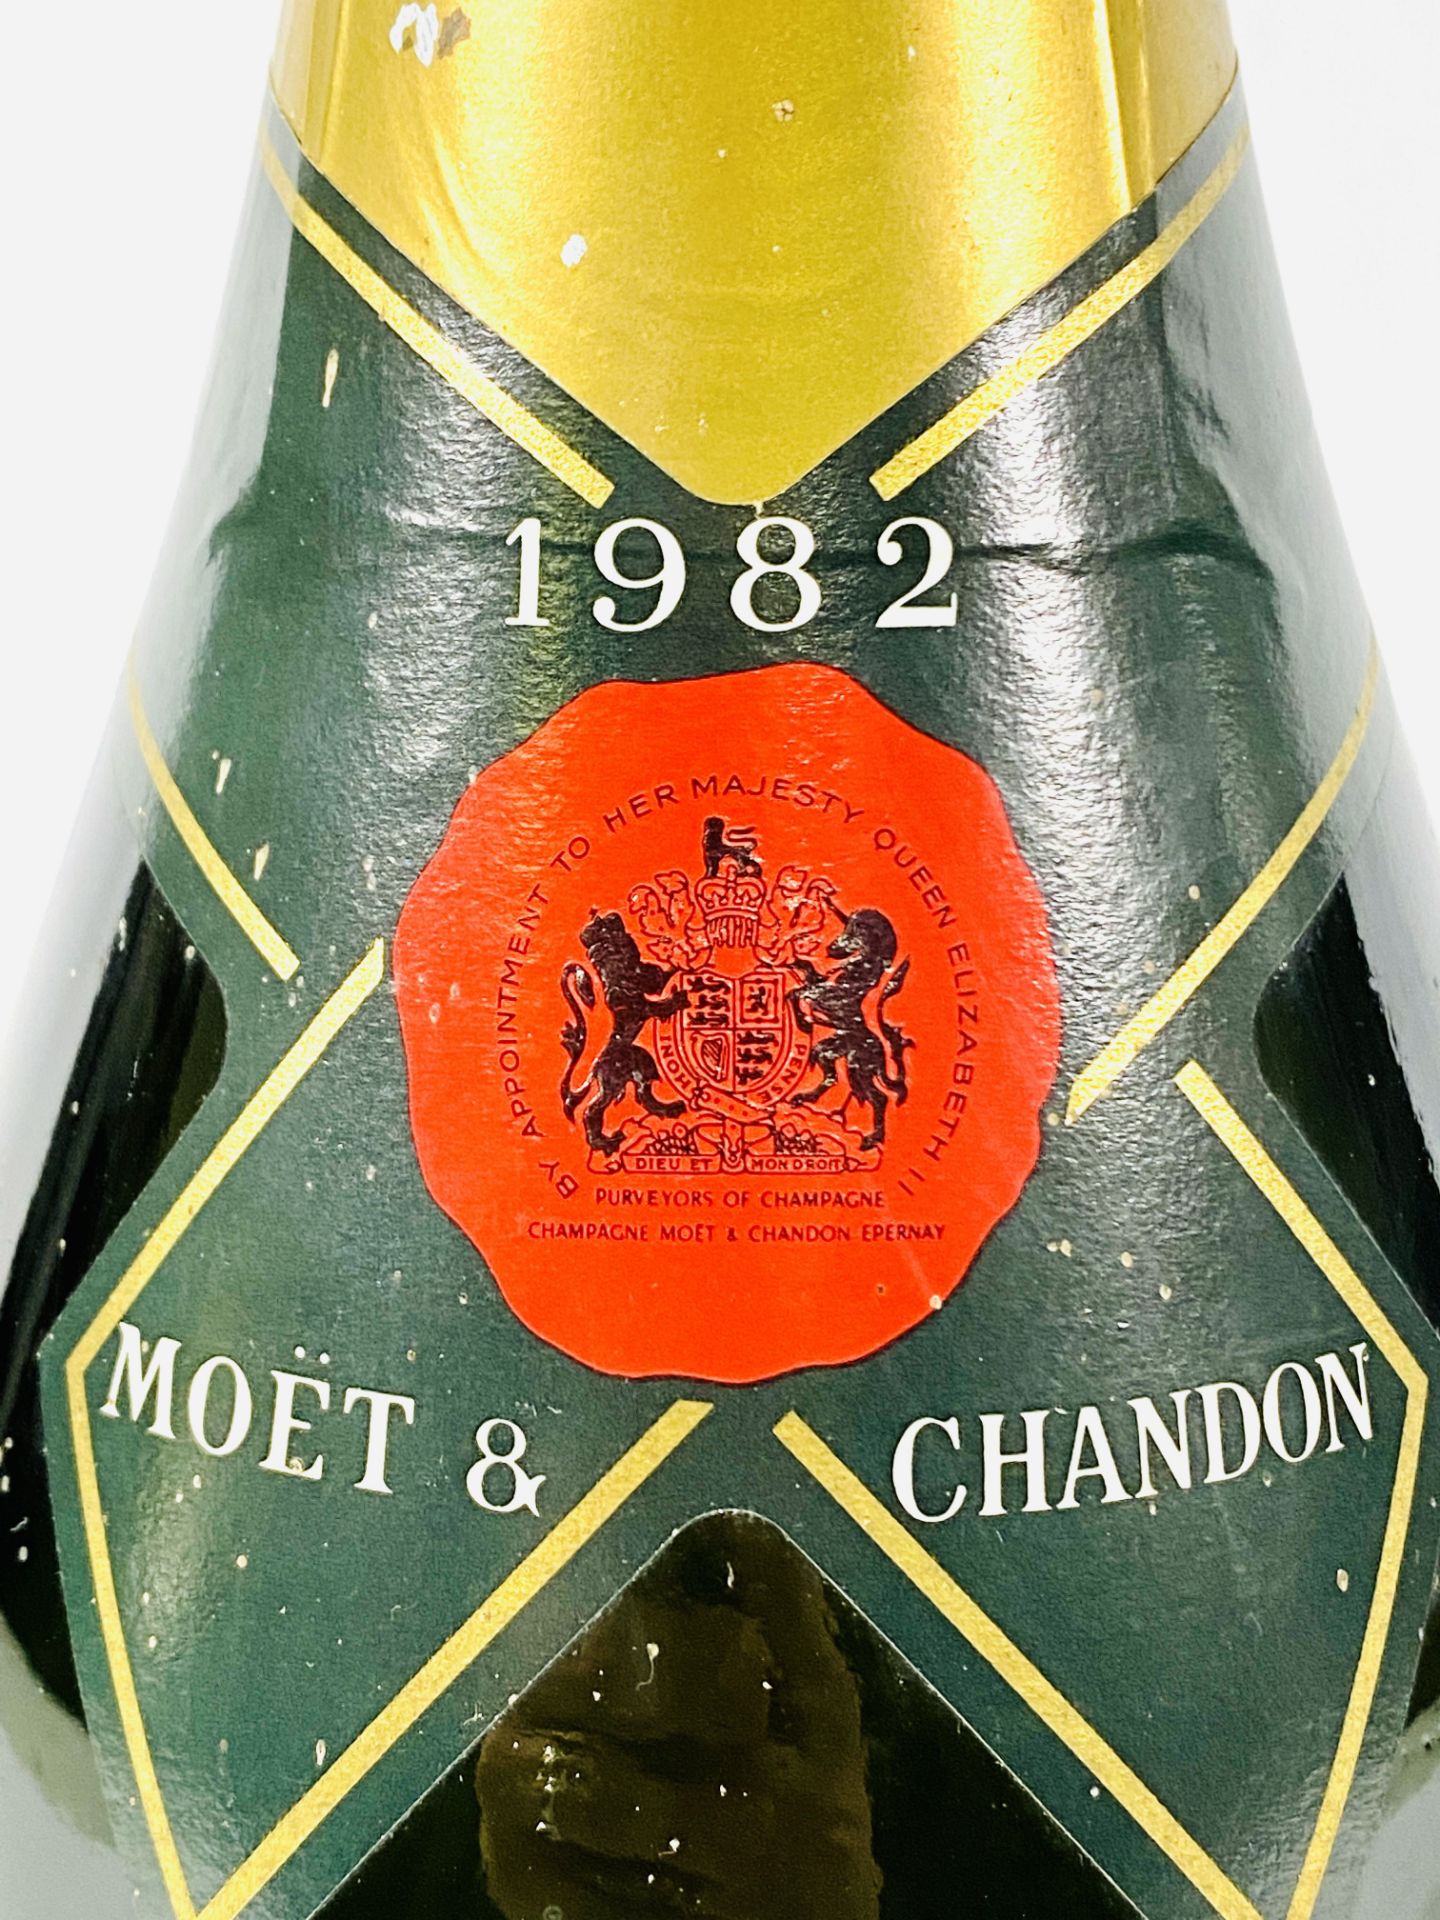 Jeroboam of Moet and Chandon champagne - Image 5 of 5